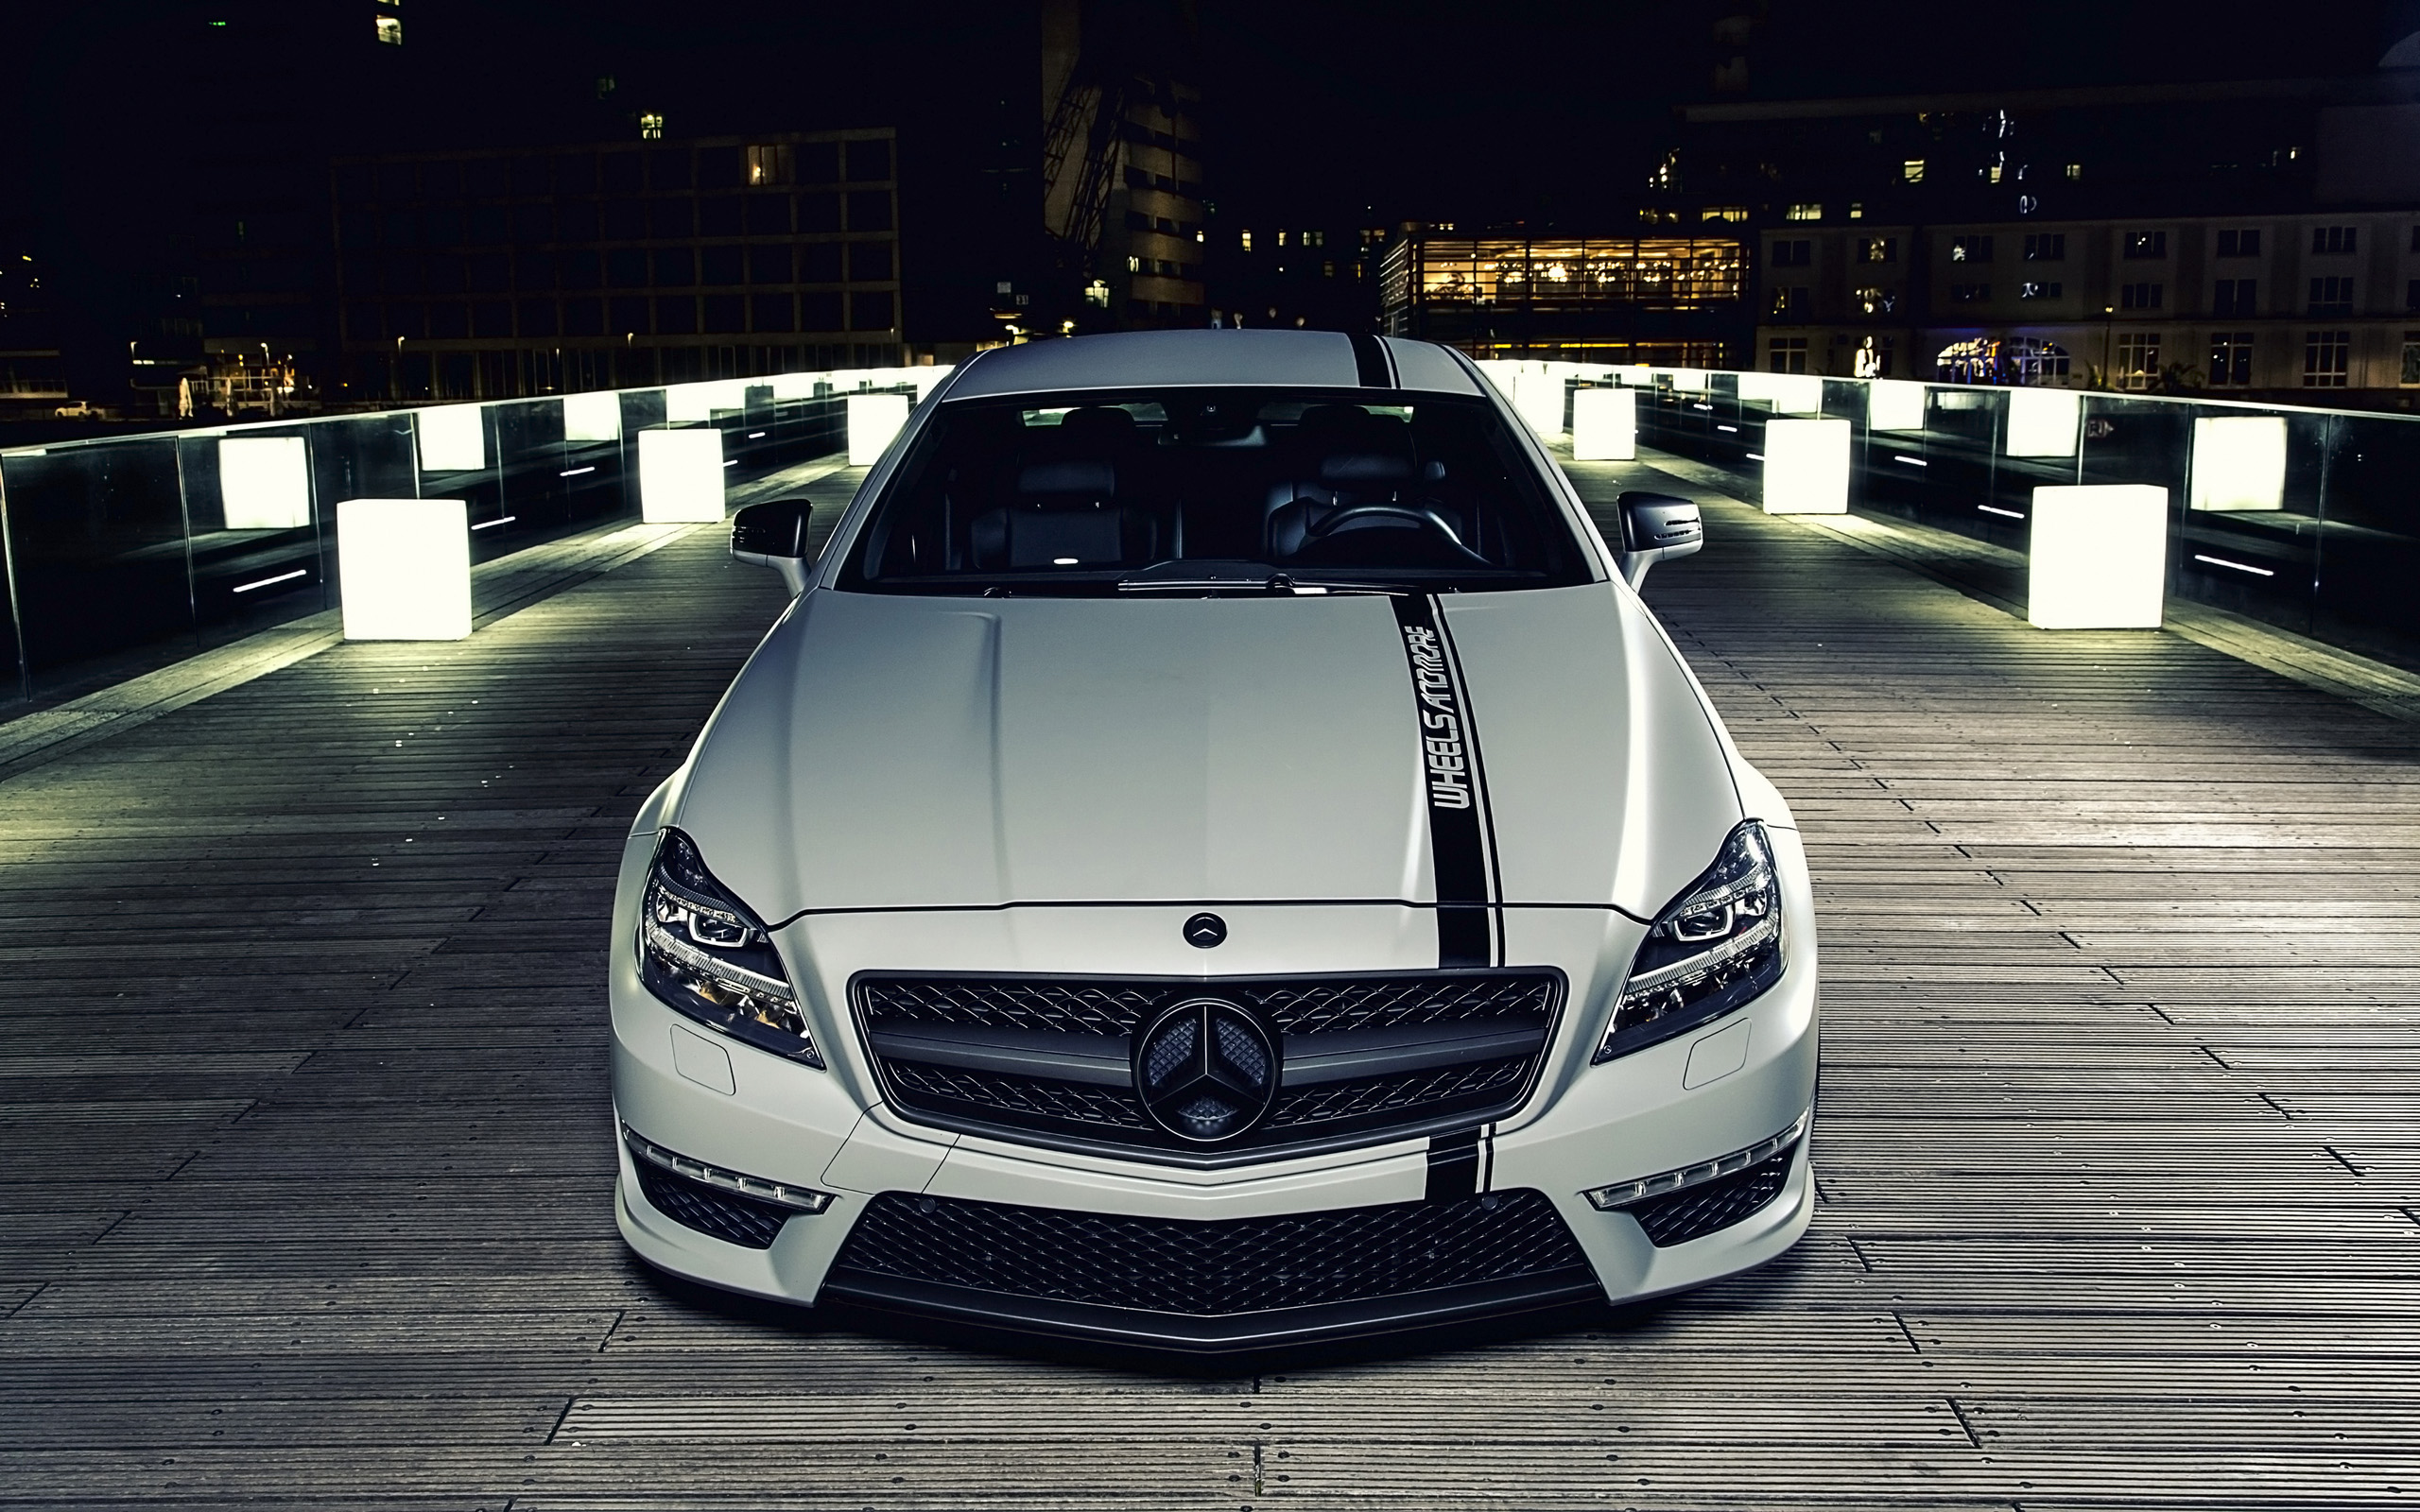 Mercedes Benz AMG Wallpapers and Background Images   stmednet